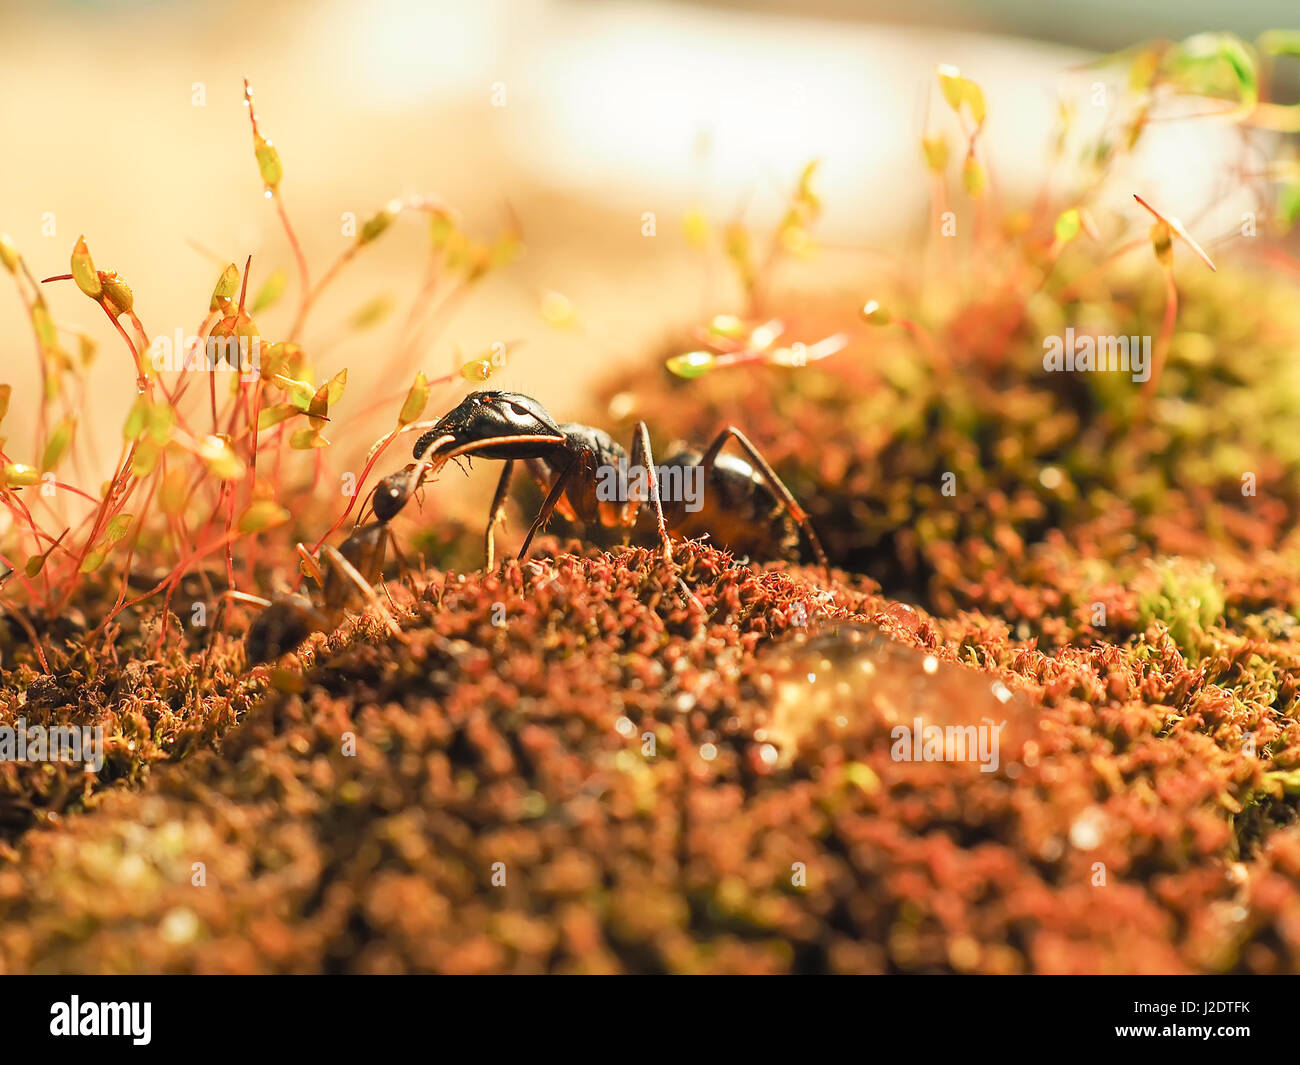 two ants kisiing on moss at sunsett shoot close Stock Photo